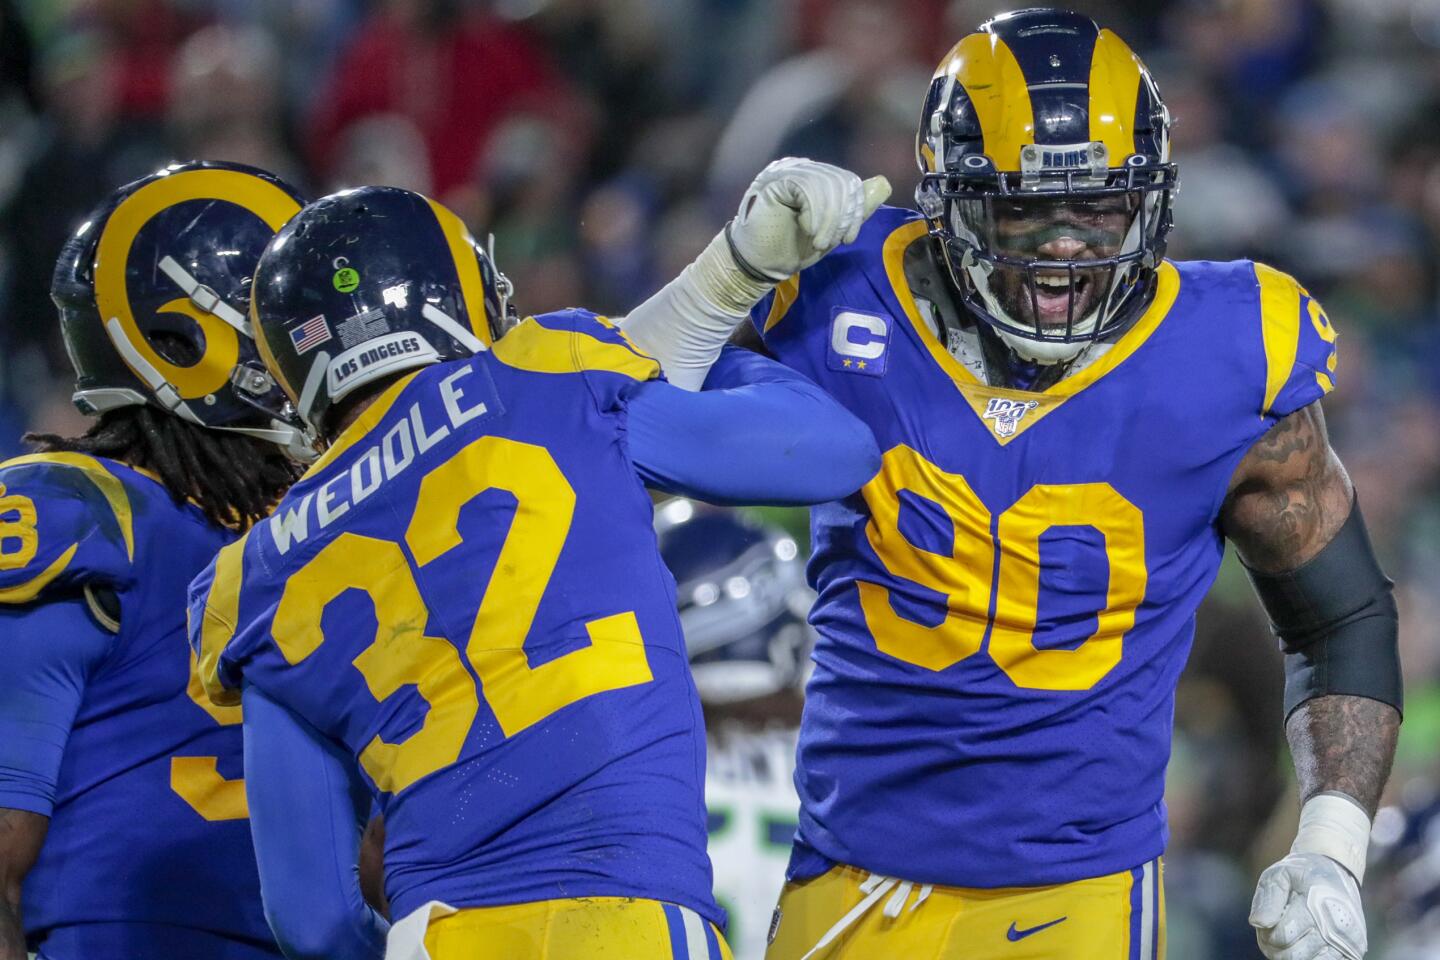 Rams free safety Eric Weddle and defensive end Michael Brockers celebrate after stopping a Seahawks drive.